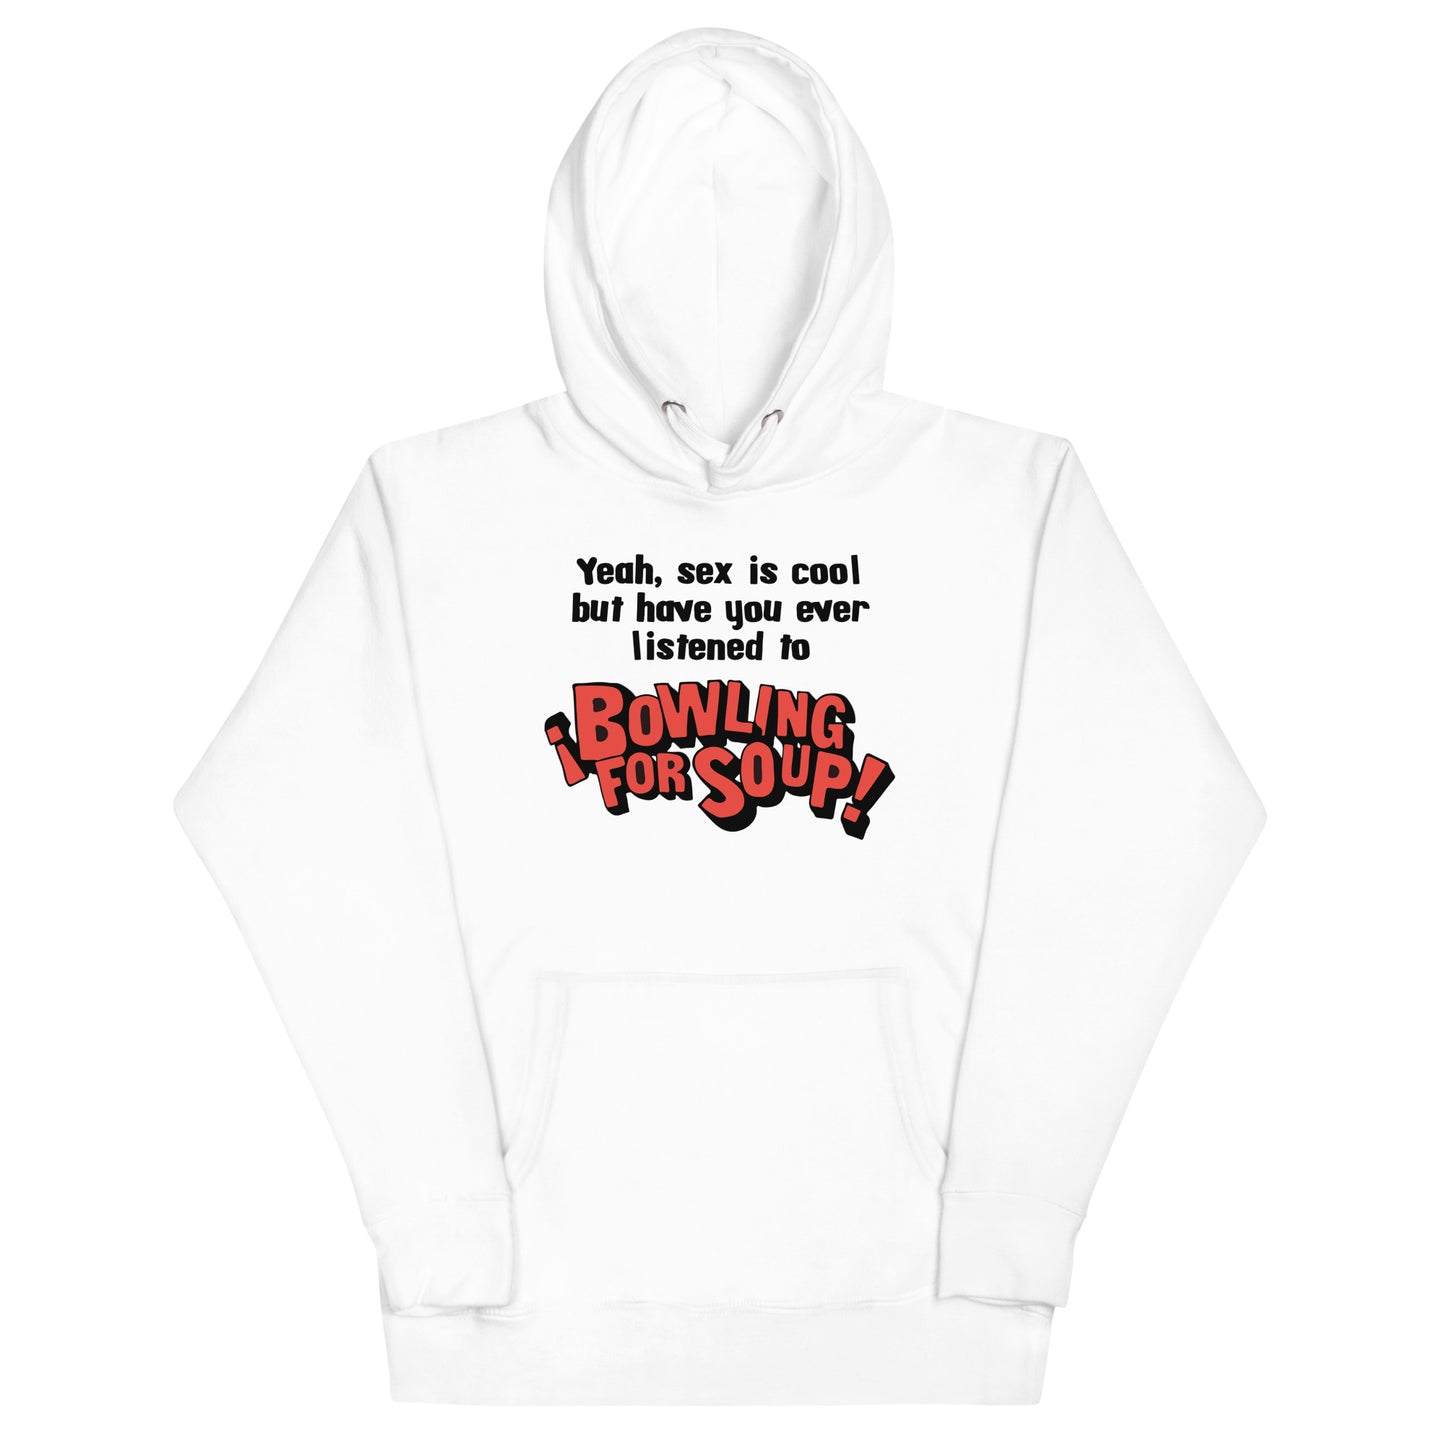 Have You Ever Listened to Bowling For Soup? Unisex Hoodie